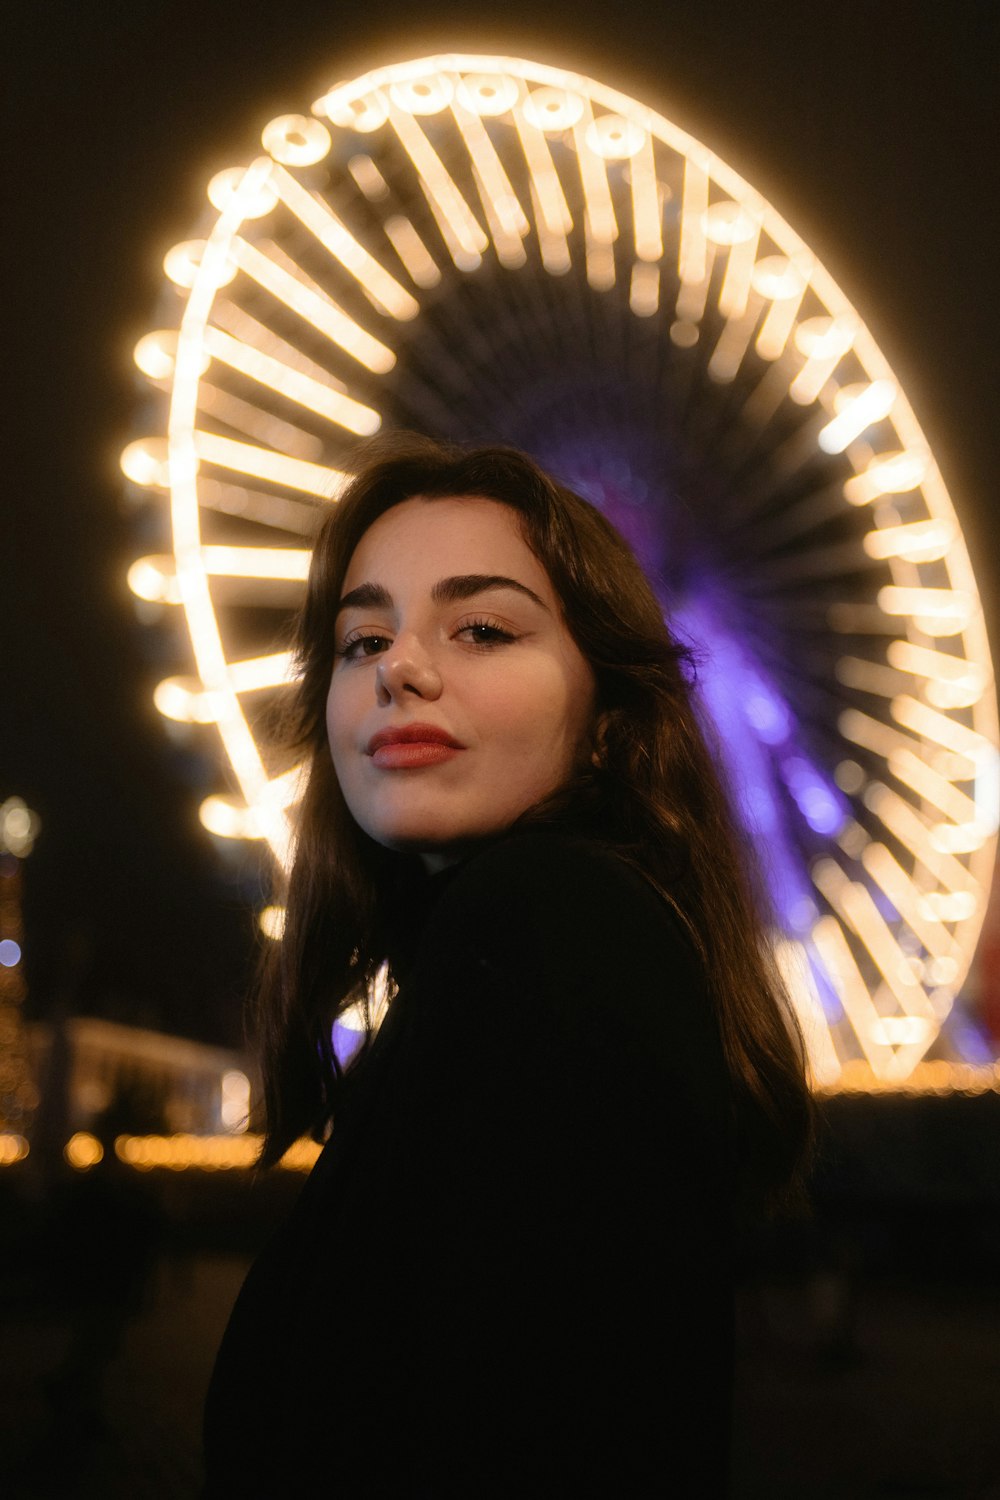 a woman standing in front of a ferris wheel at night